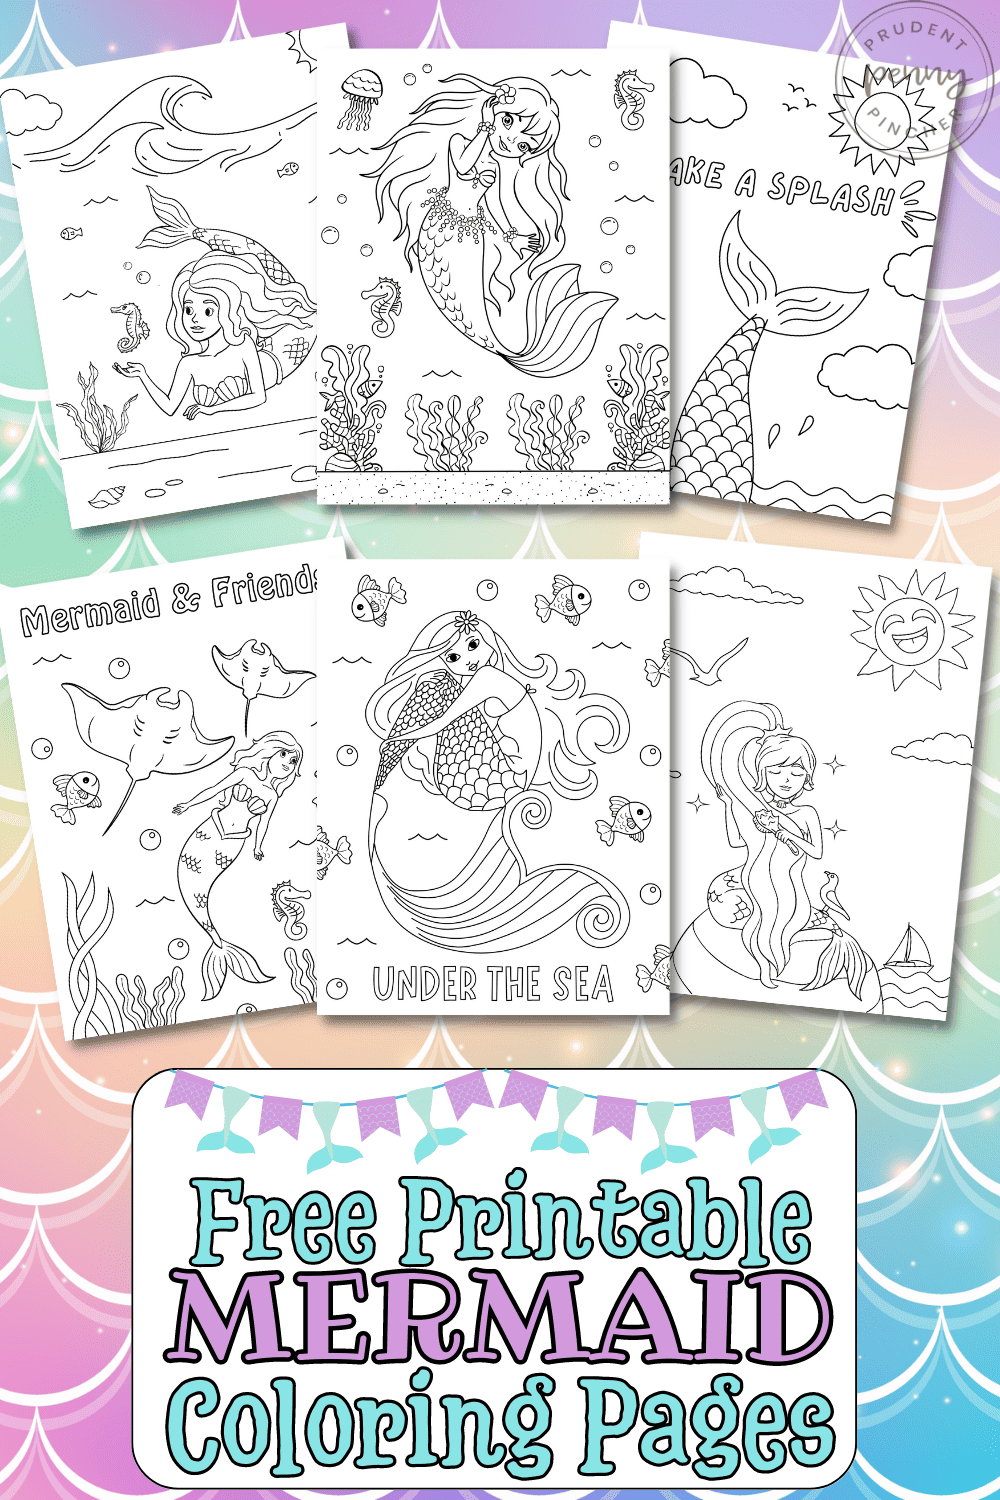 20 Free Printable Mermaid Coloring Pages for Kids